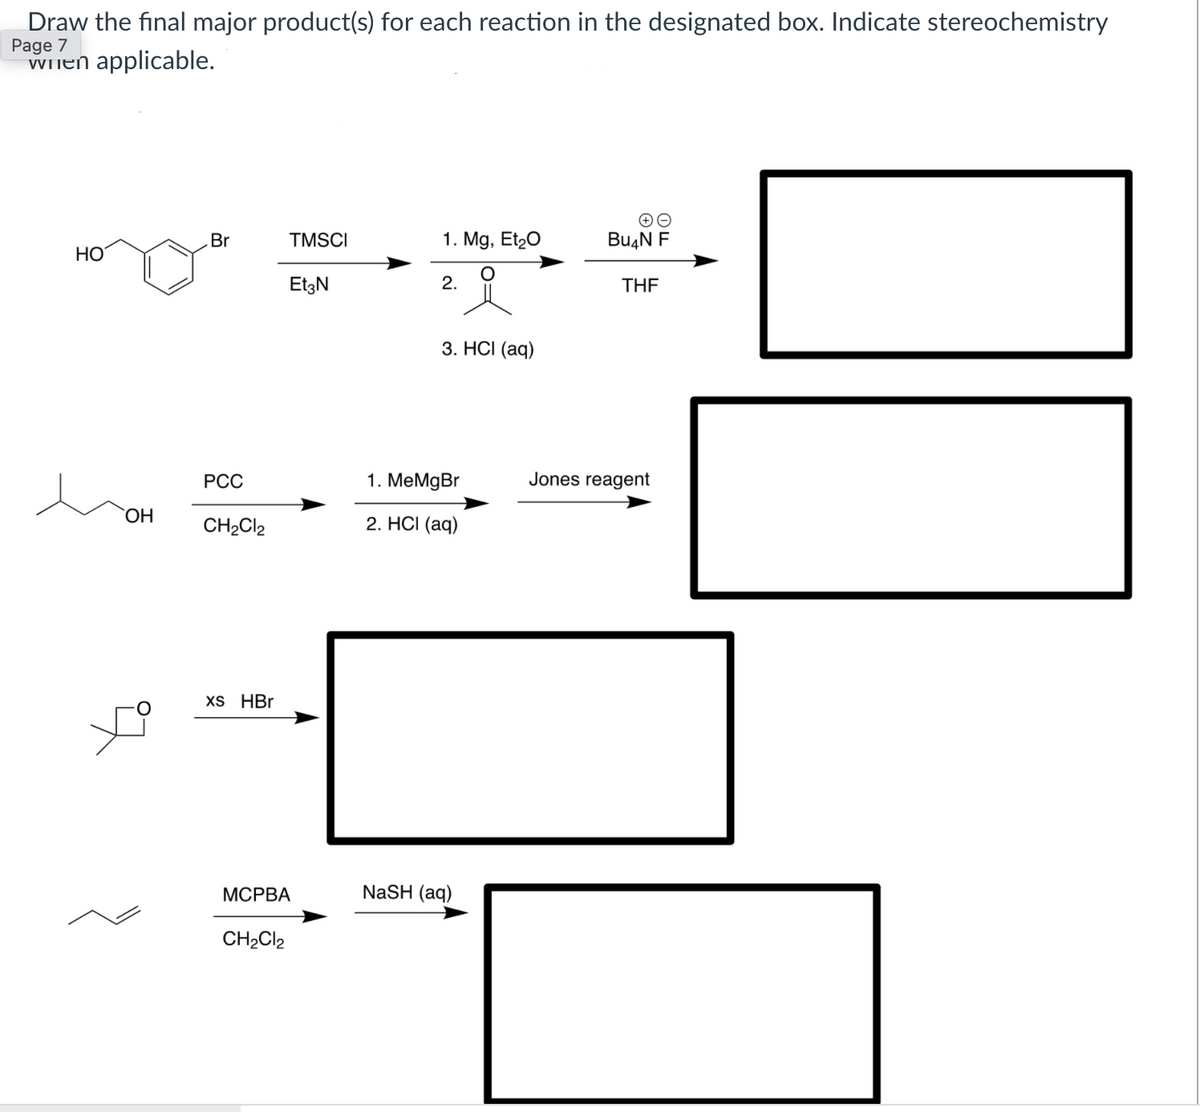 Draw the final major product(s) for each reaction in the designated box. Indicate stereochemistry
Page 7
WInen applicable.
Br
TMSCI
1. Mg, Et20
Bu4N F
НО
EtzN
2.
THE
3. HСI (aq)
РСС
1. MeMgBr
Jones reagent
ОН
CH2CI2
2. HCI (aq)
XS HBr
МСРВА
NaSH (aq)
CH2CI2
